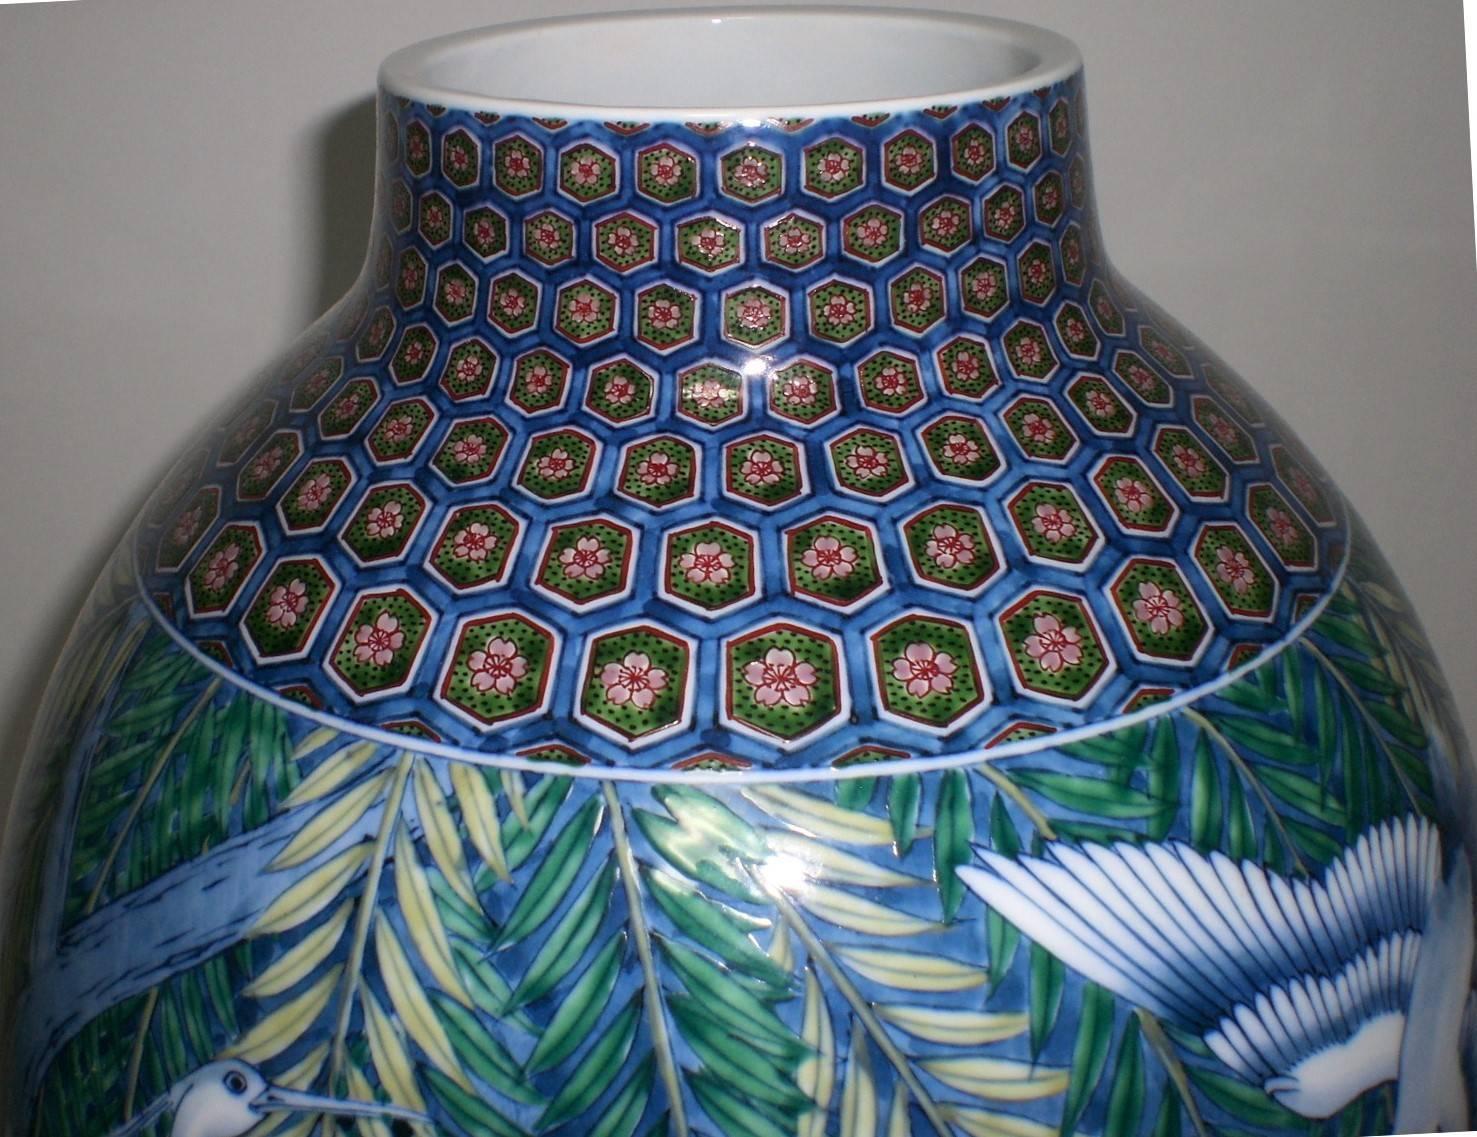 Mesmerizing very large Japanese contemporary decorative porcelain vase, intricately hand painted on a stunningly shaped body, a signed masterpiece by highly acclaimed award-winning master porcelain artist of the Imari-Arita region of Japan